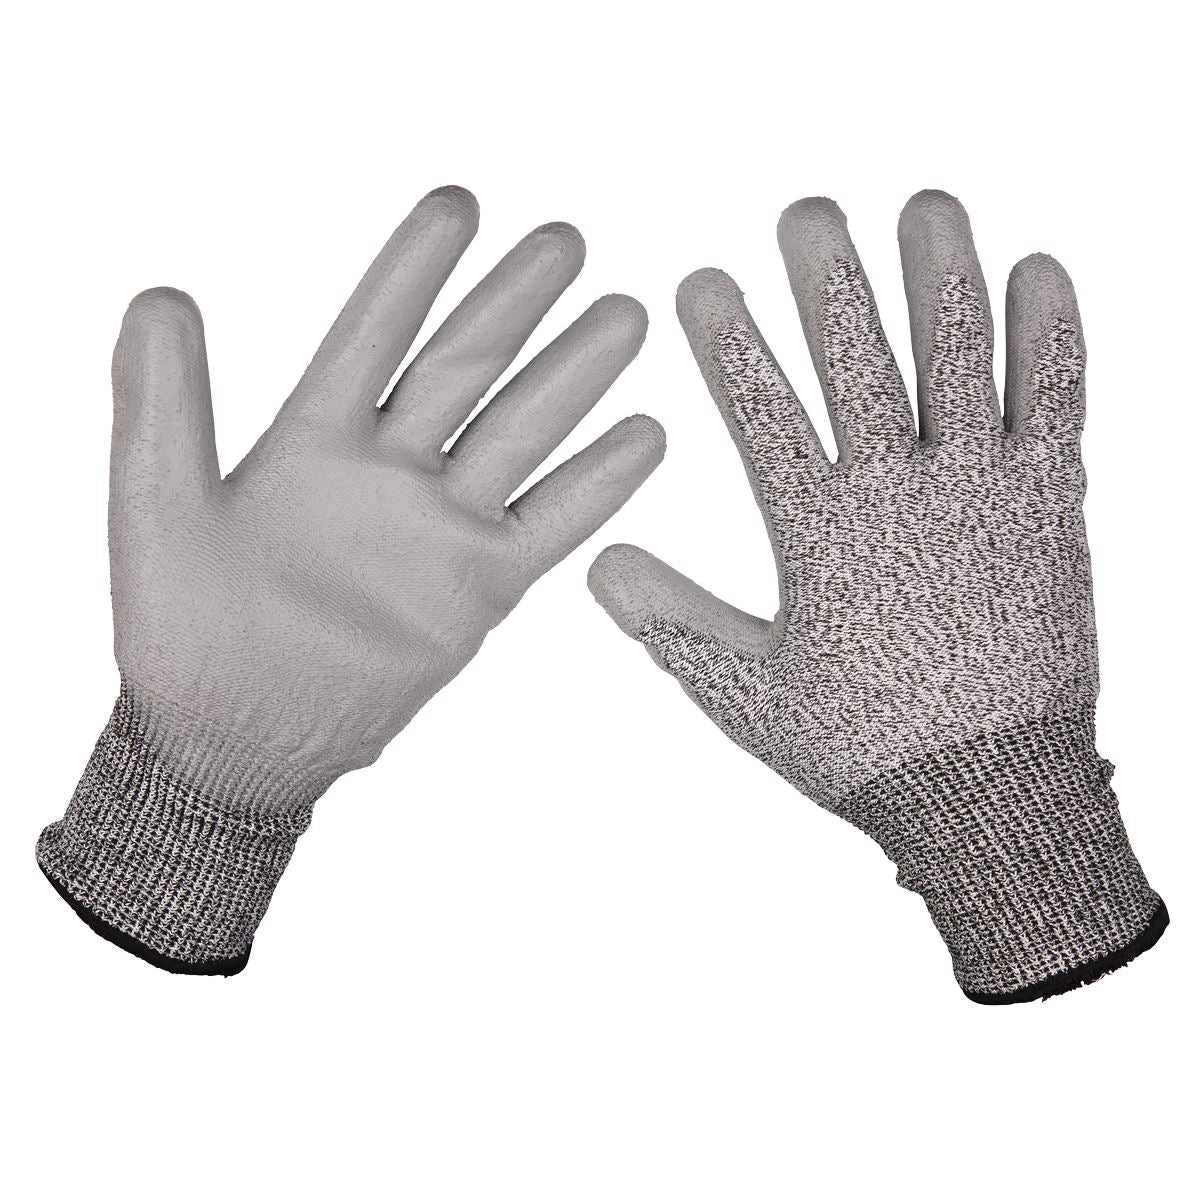 Worksafe by Sealey Anti-Cut PU Gloves (Cut Level C - X-Large) - Pair